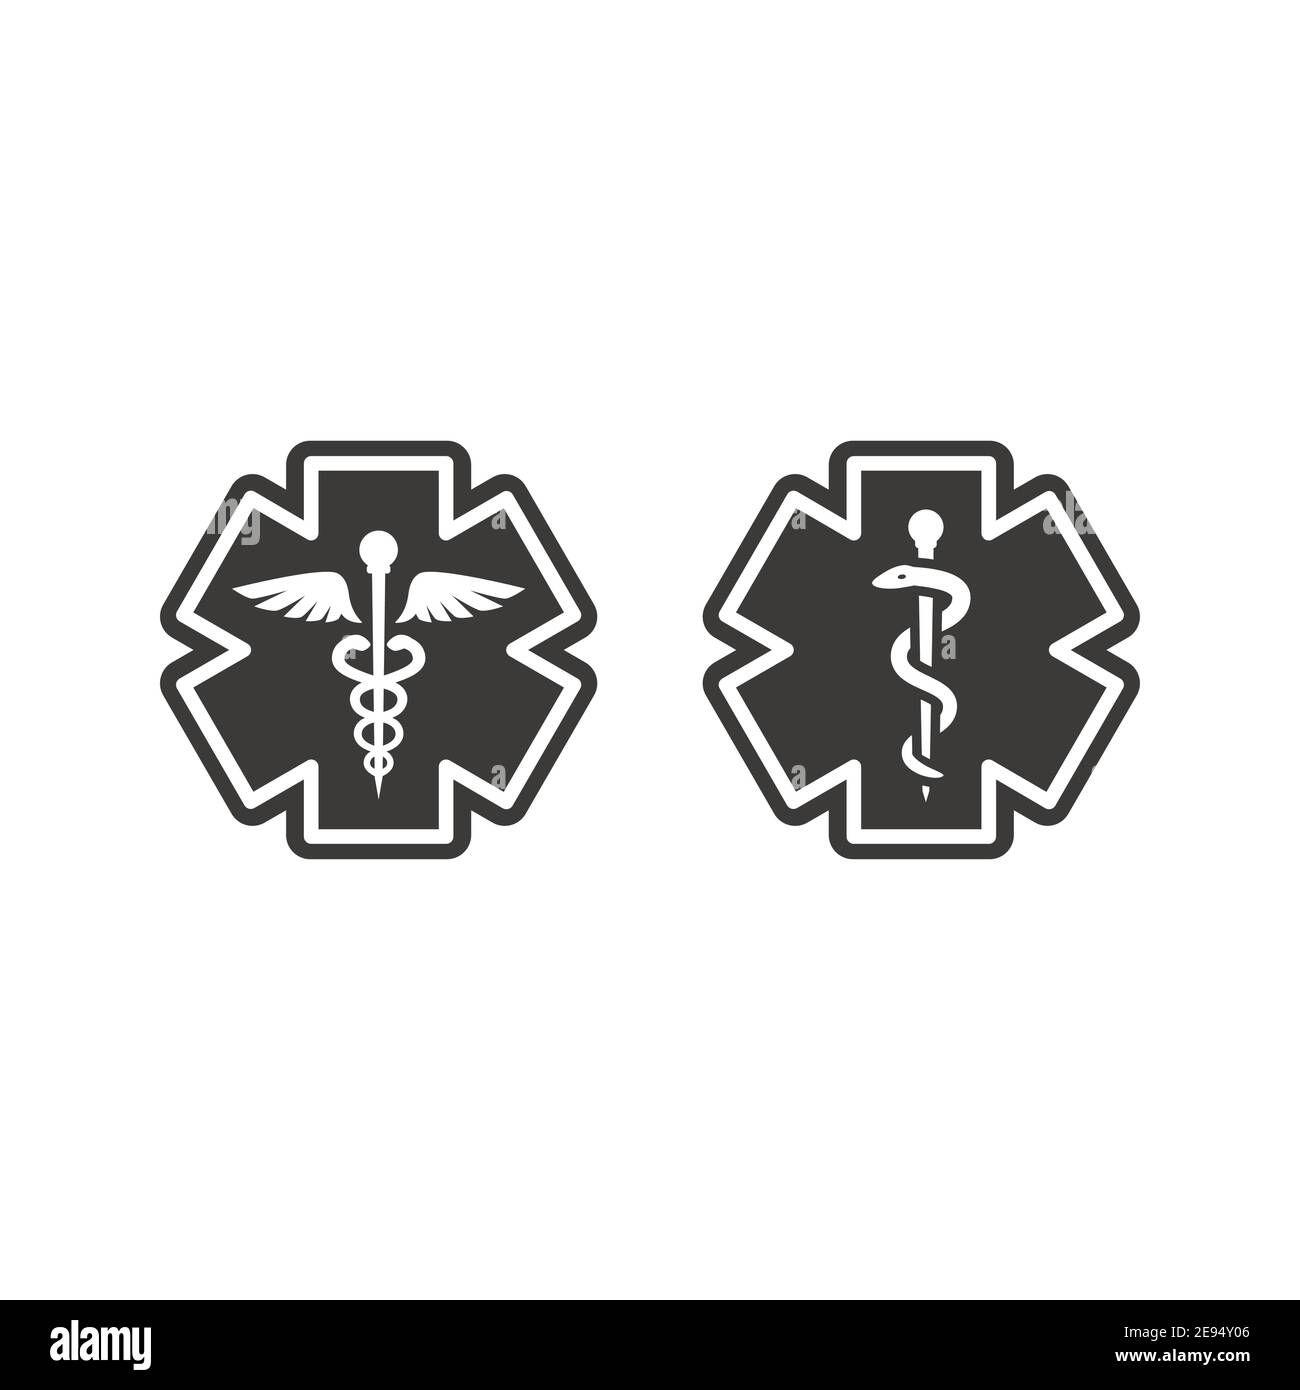 First aid, medical emergency vector symbol. Rod of asclepius or aesculapius and Caduceus with snake, ems icon. Stock Vector